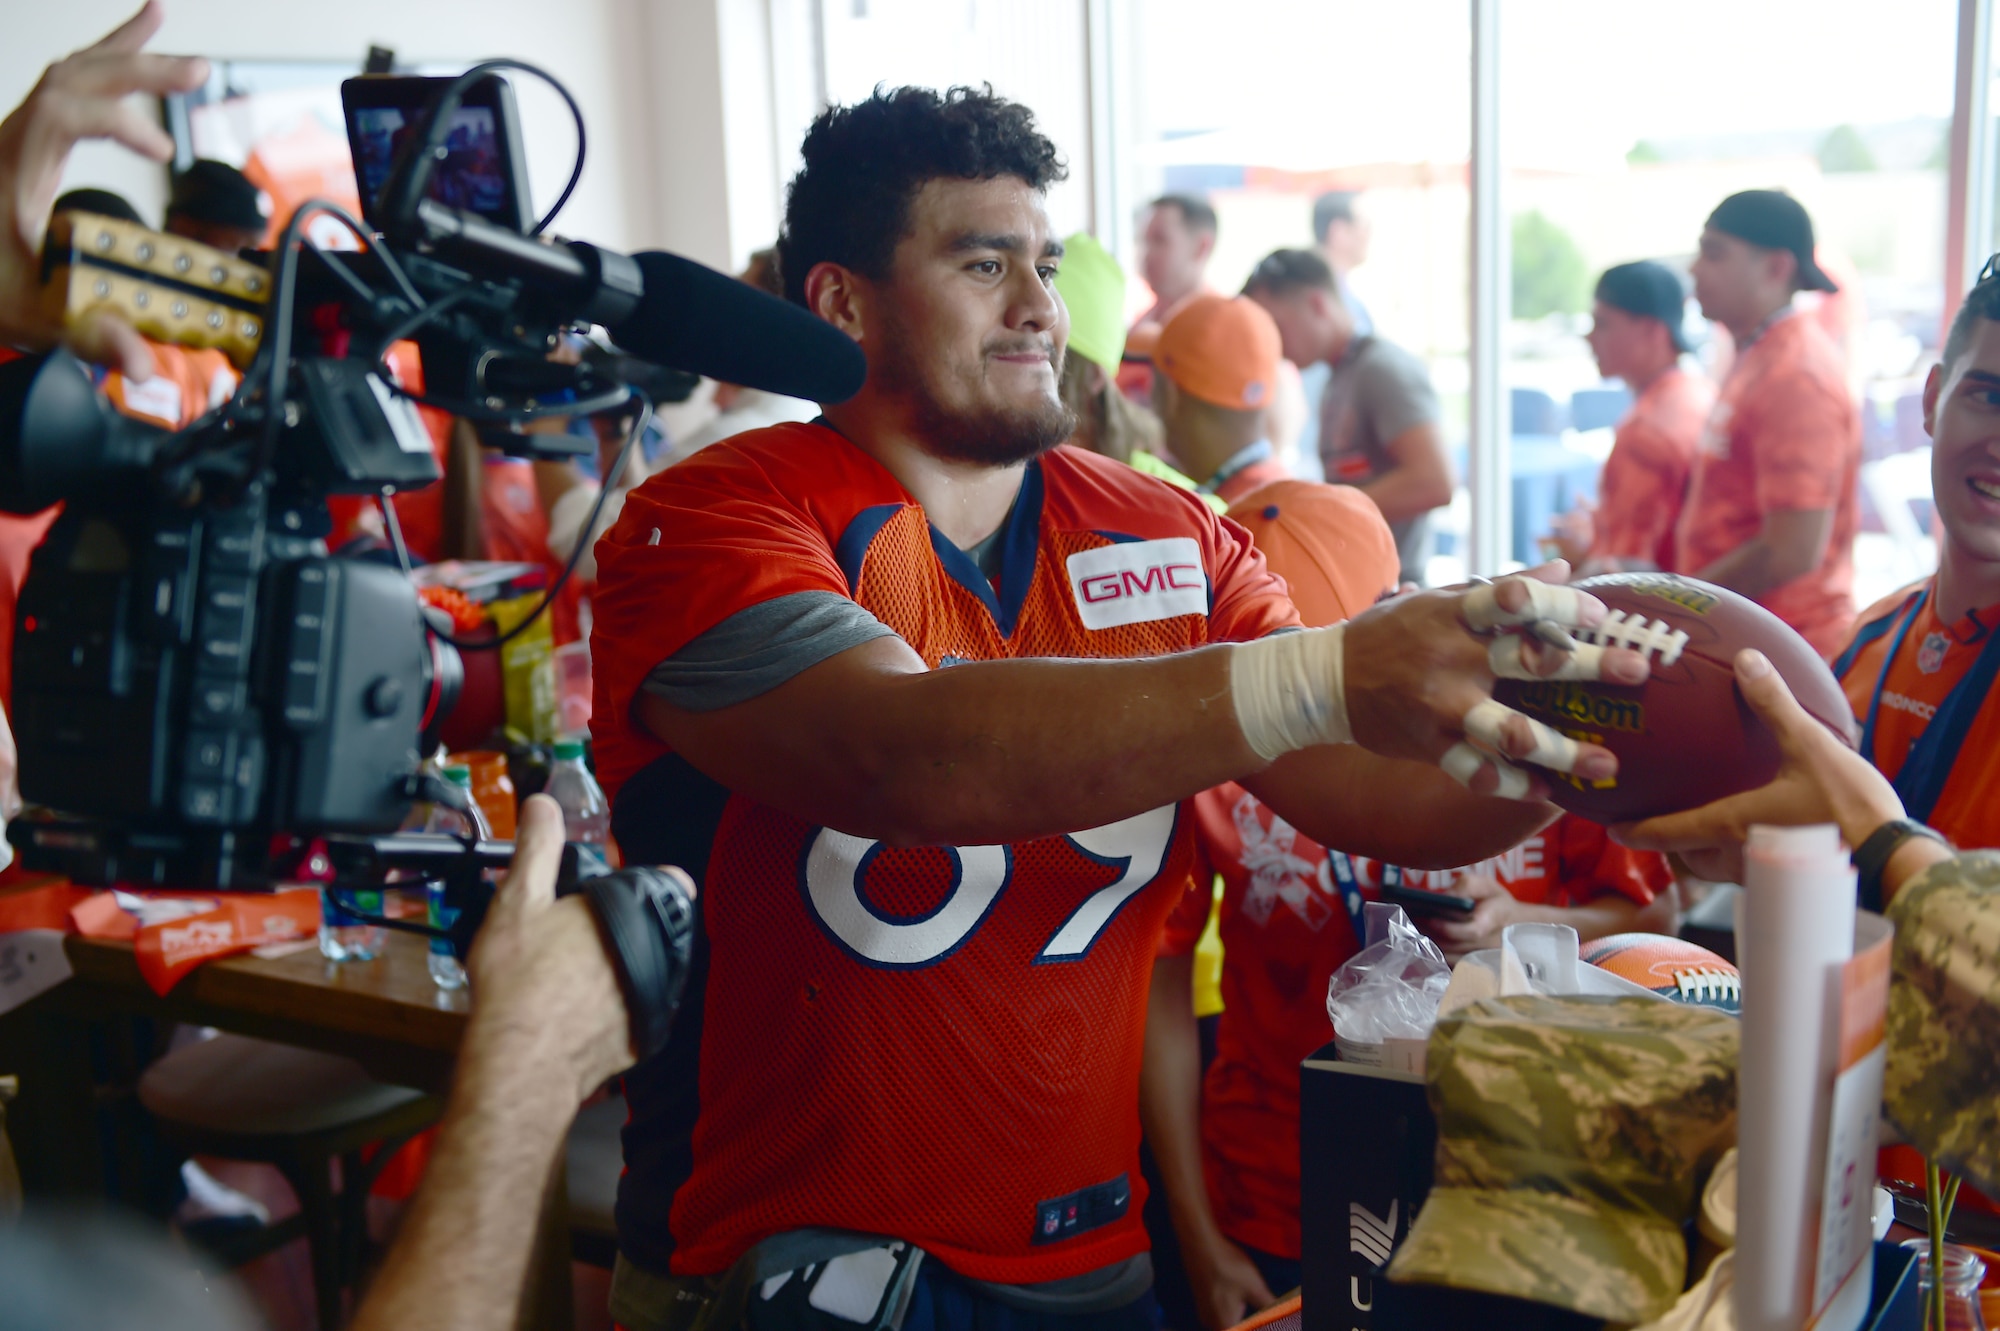 Sione Fua, Denver Broncos defensive lineman, signs autographs for military members after morning practice Aug. 7, 2015, at Denver Broncos Headquarters Facility at Dove Valley in Denver. The combine consisted of drills similar to the ones prospective National Football League players are expected to complete during the NFL combine held in Indianapolis before the NFL draft. All participants were also treated to a viewing of the Broncos’ Friday morning practice and a visit from Broncos players, as well as the head coach. (U.S. Air Force photo by Airman 1st Class Luke W. Nowakowski/Released)